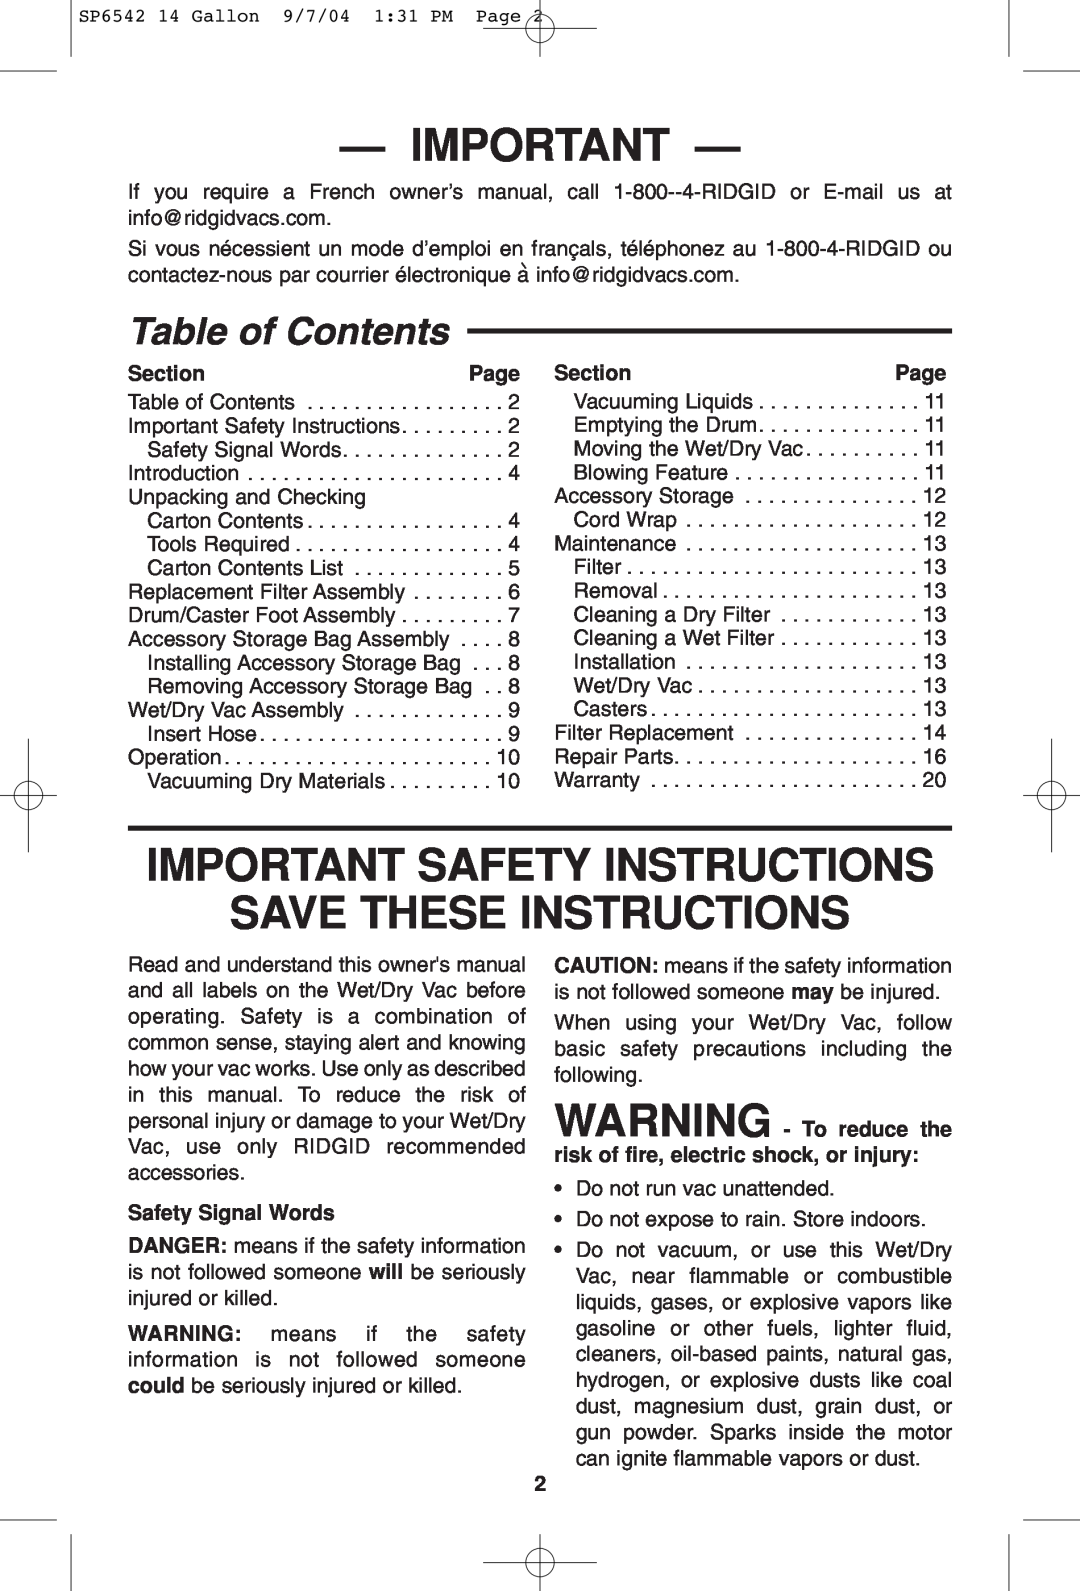 RIDGID WD1450 owner manual Table of Contents, Important Safety Instructions, Save These Instructions 